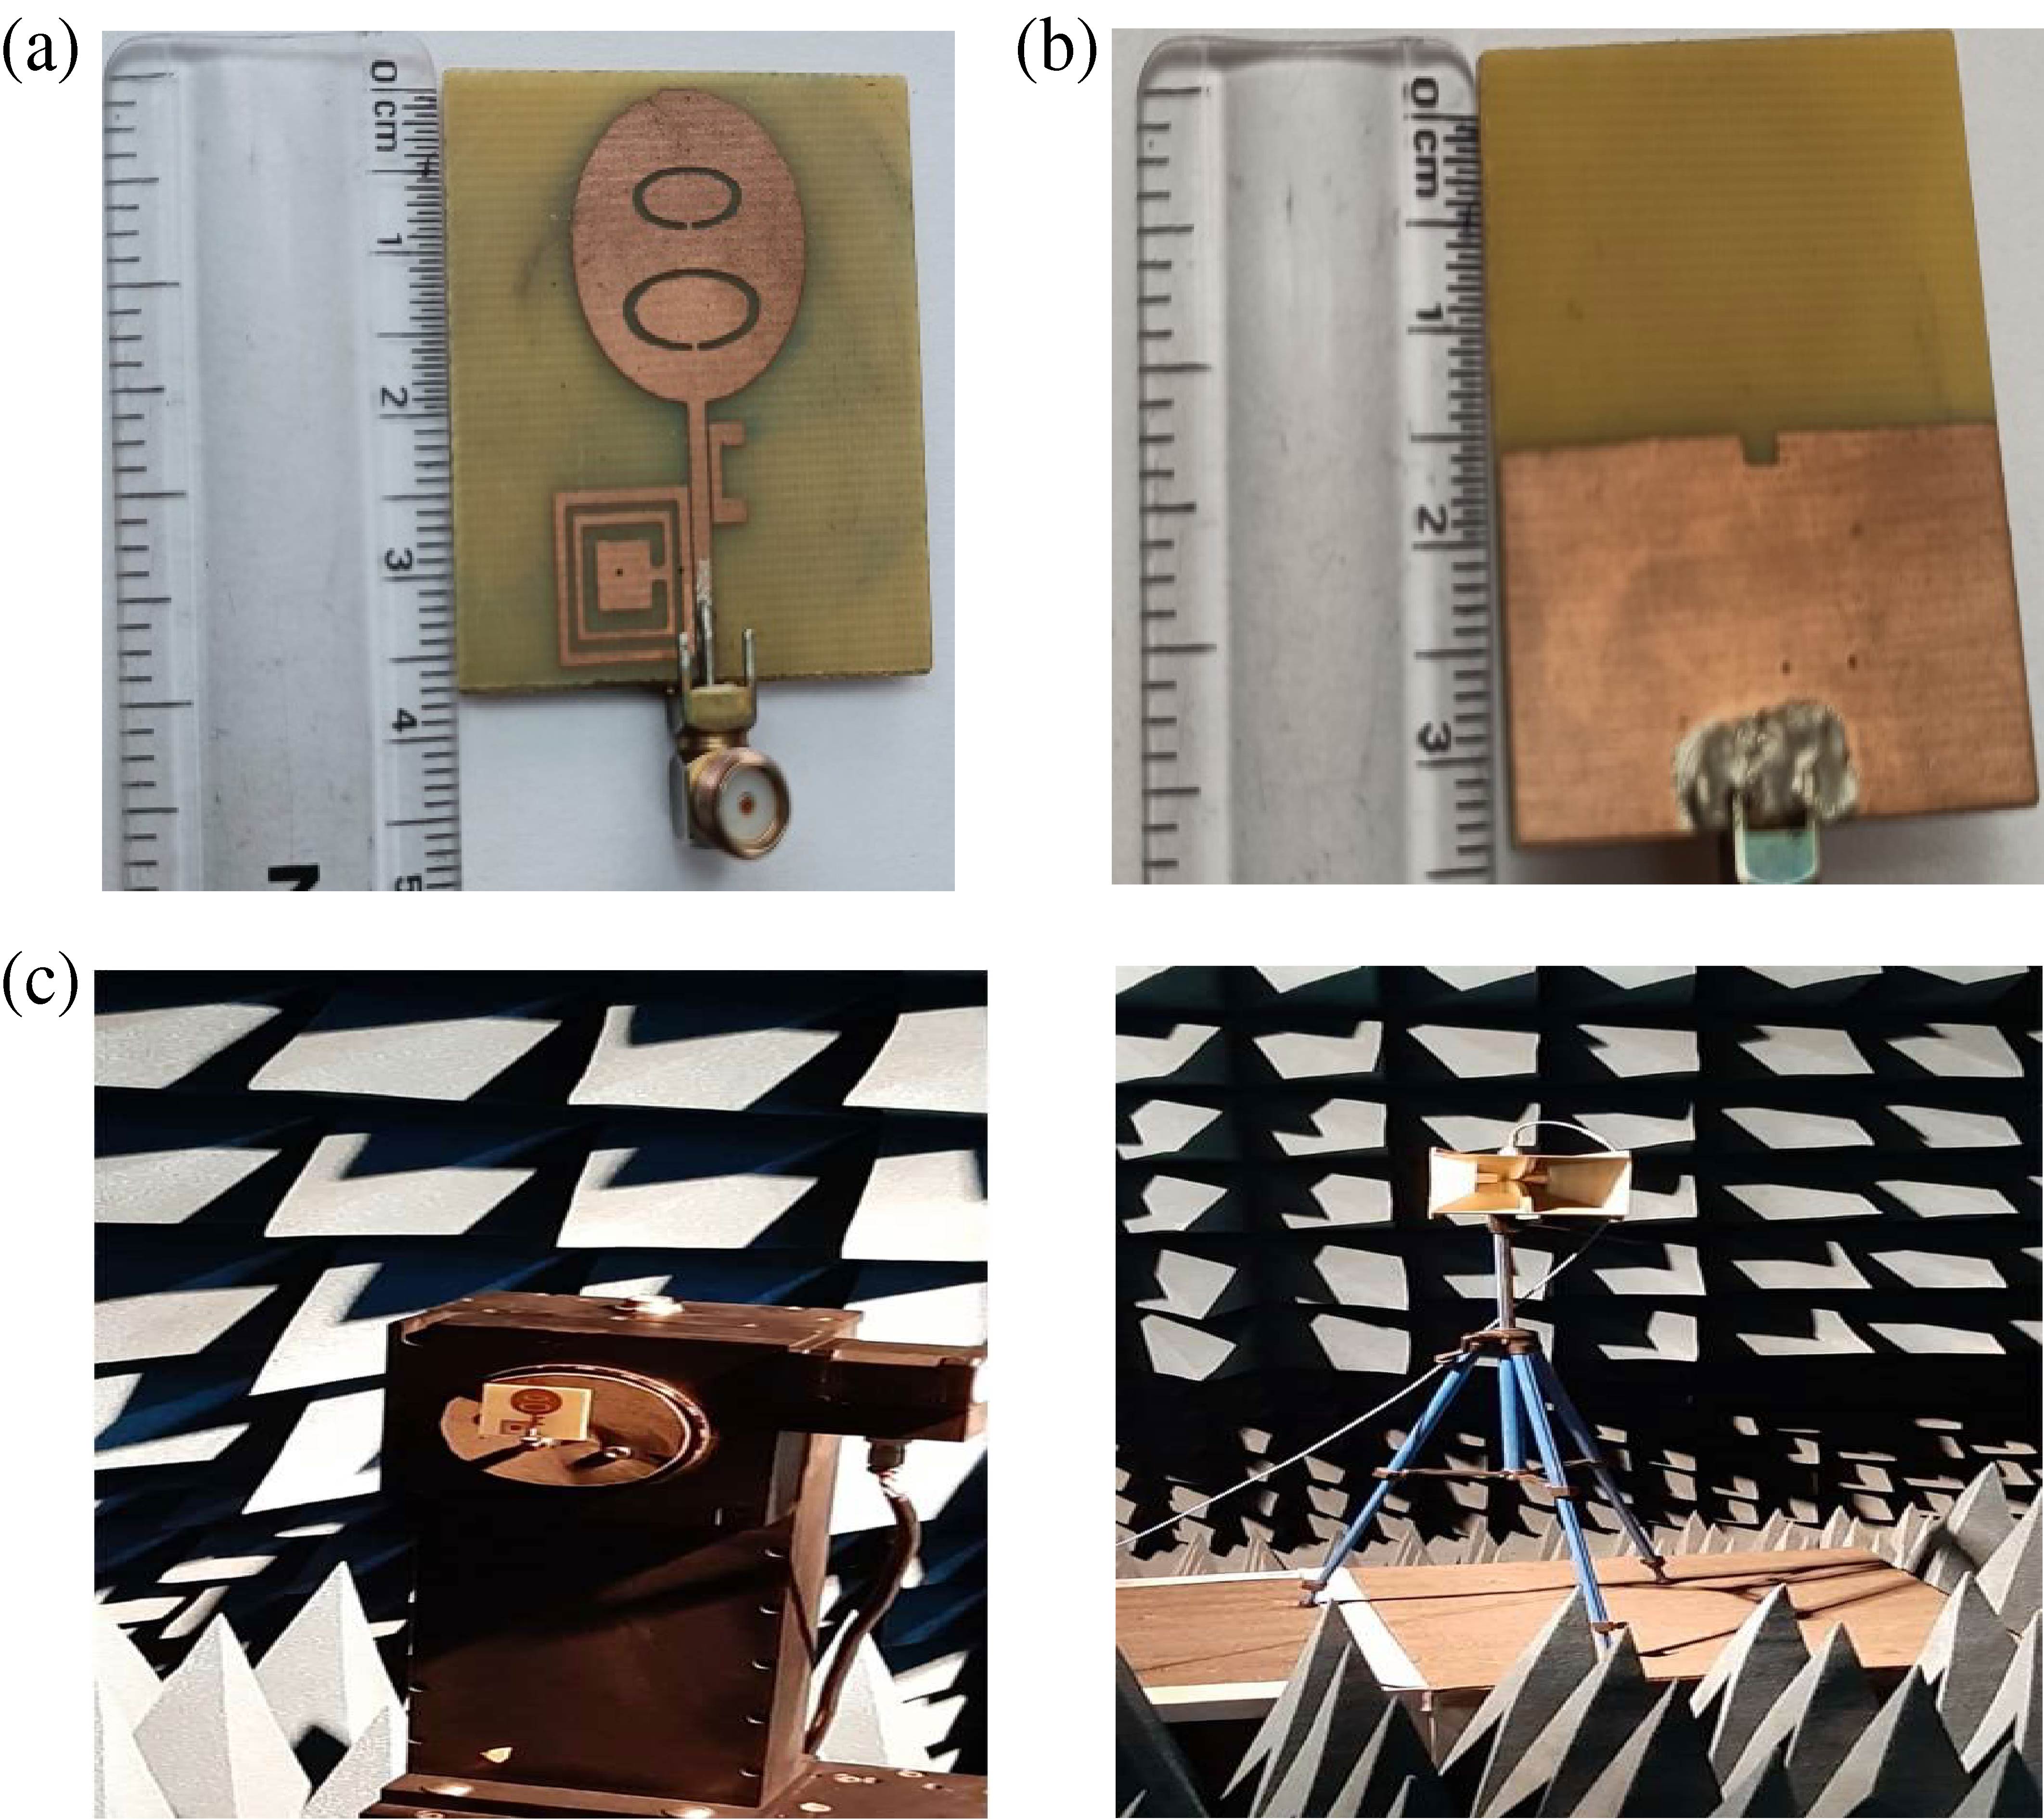 Ultra-wideband Antenna with Quintuple Band Notches Integrated with Metamaterials